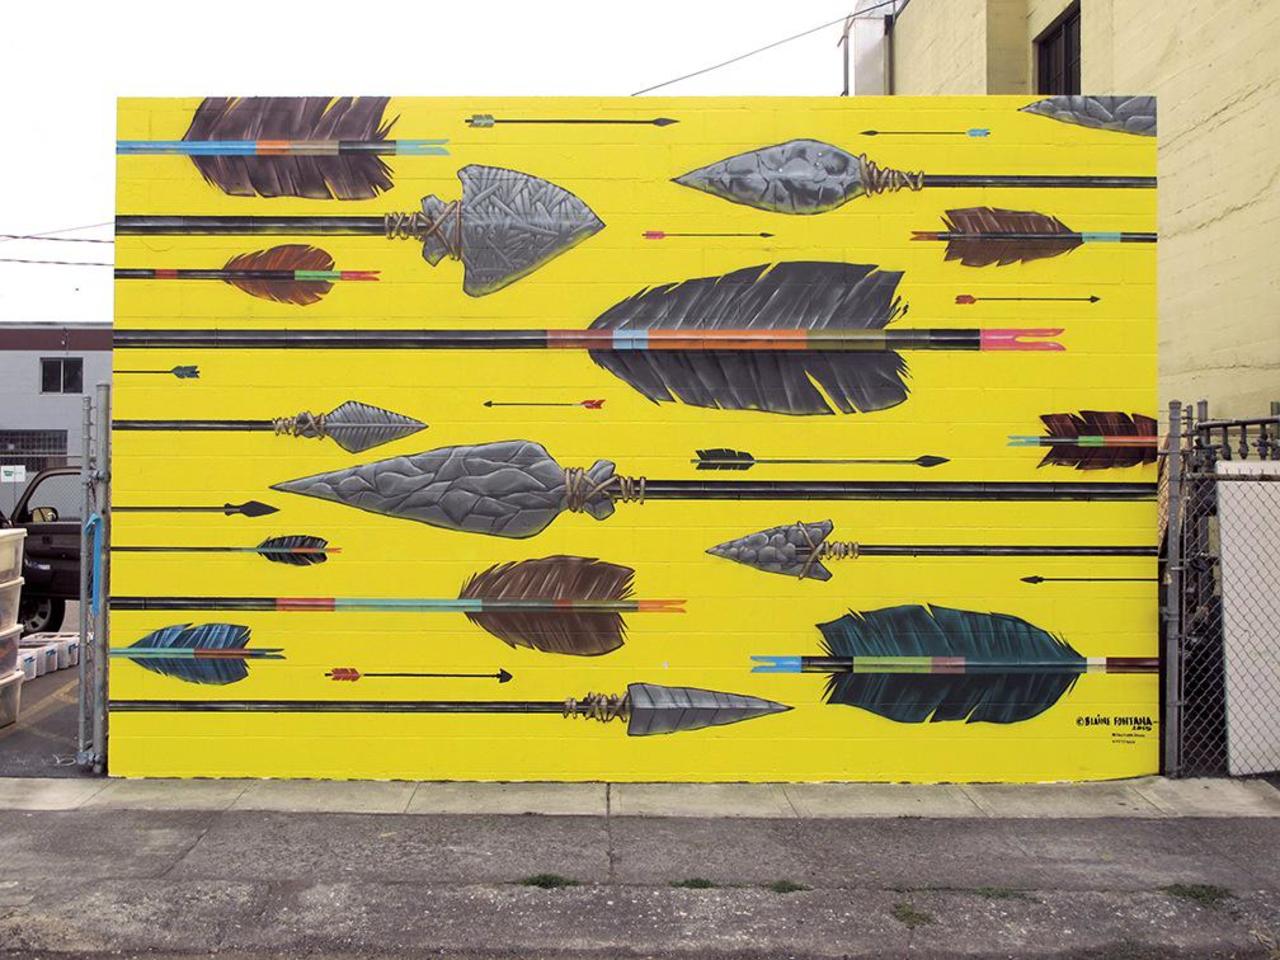 A new piece by Blaine Fontana for Forest for the Trees in Portland, US. #StreetArt #Graffiti #Mural http://t.co/fkPckEqsoL